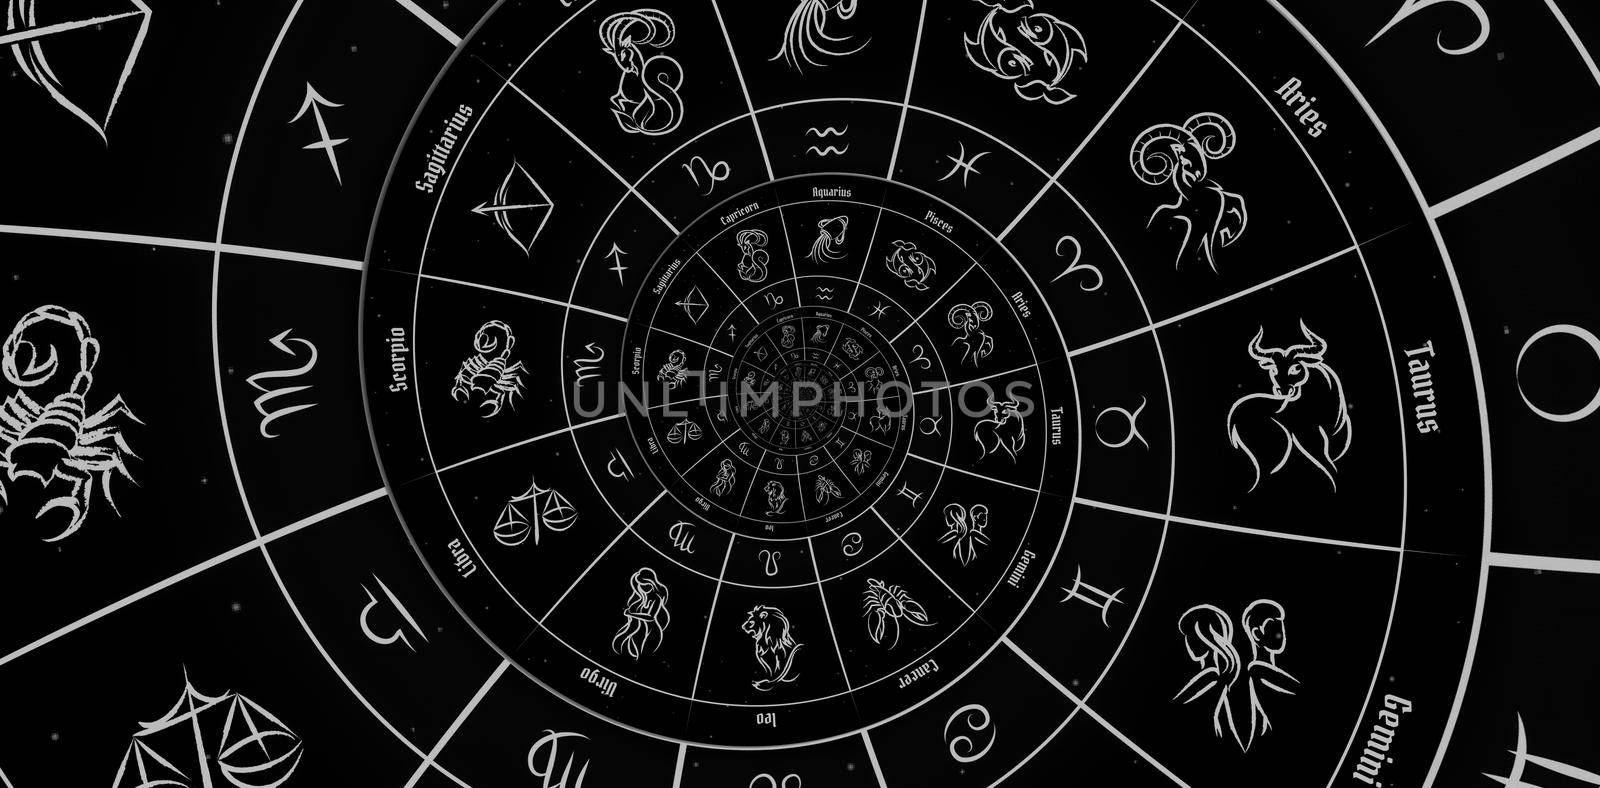 Astrology and alchemy sign background illustration by Perseomedusa